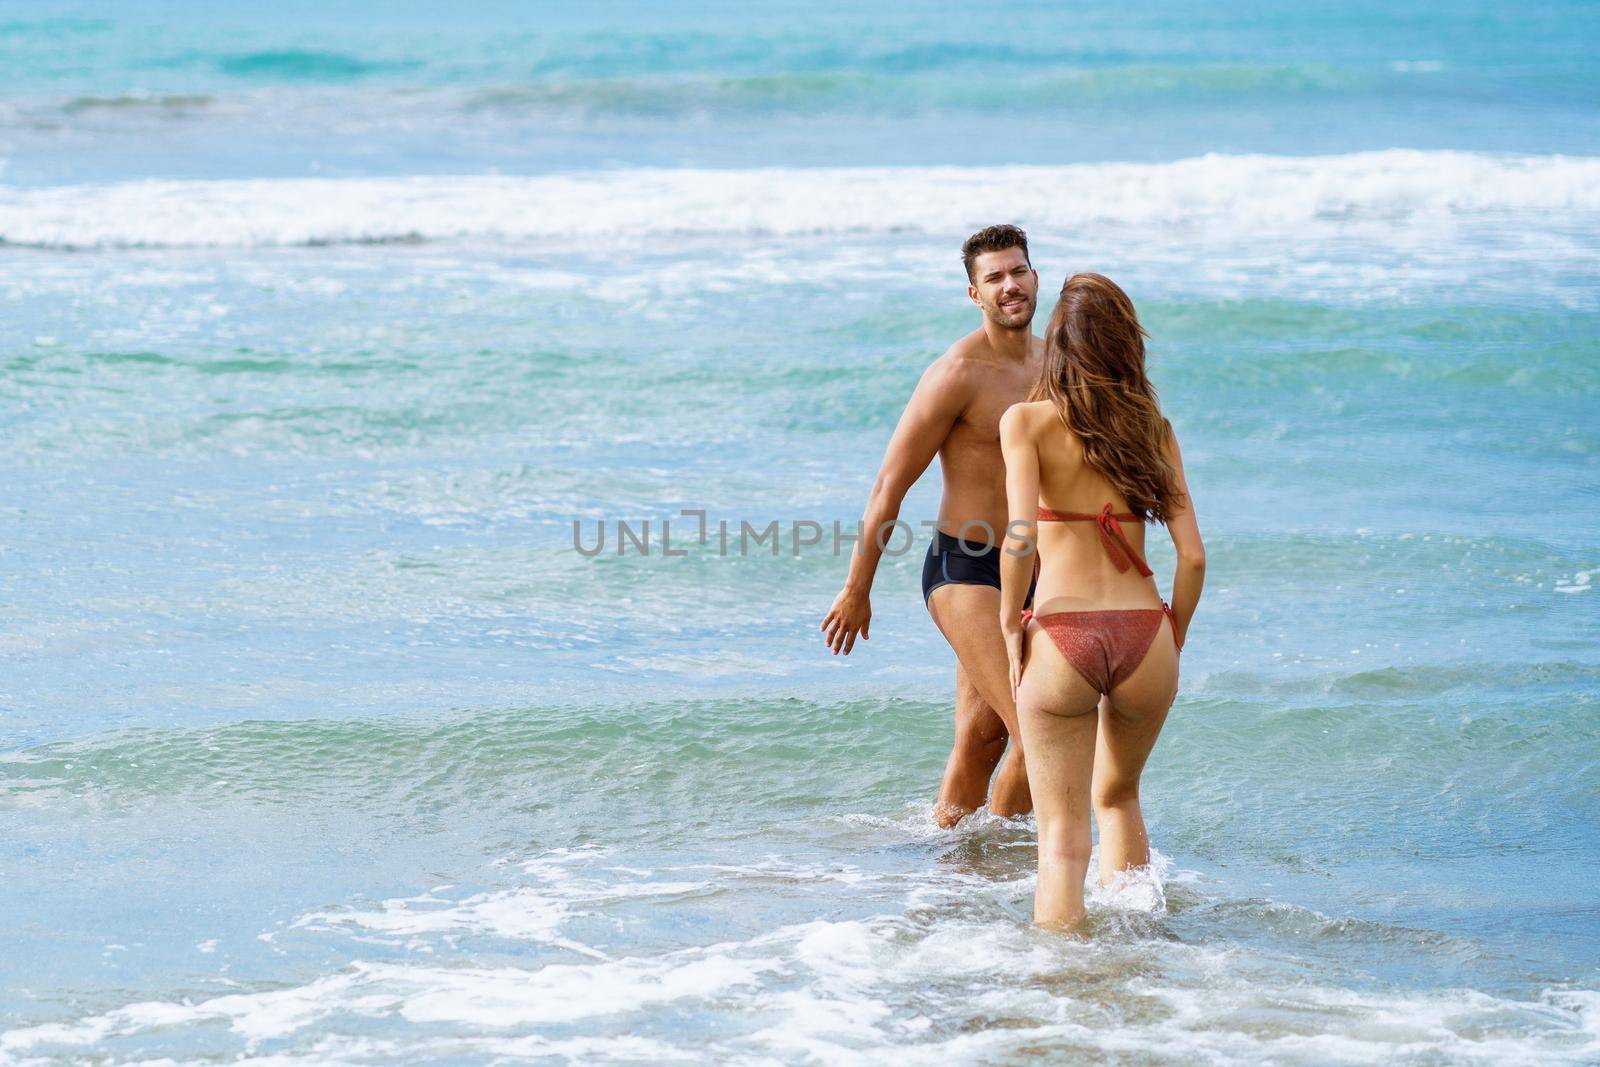 Young couple bathing together on the beach enjoying their holiday at sea by javiindy